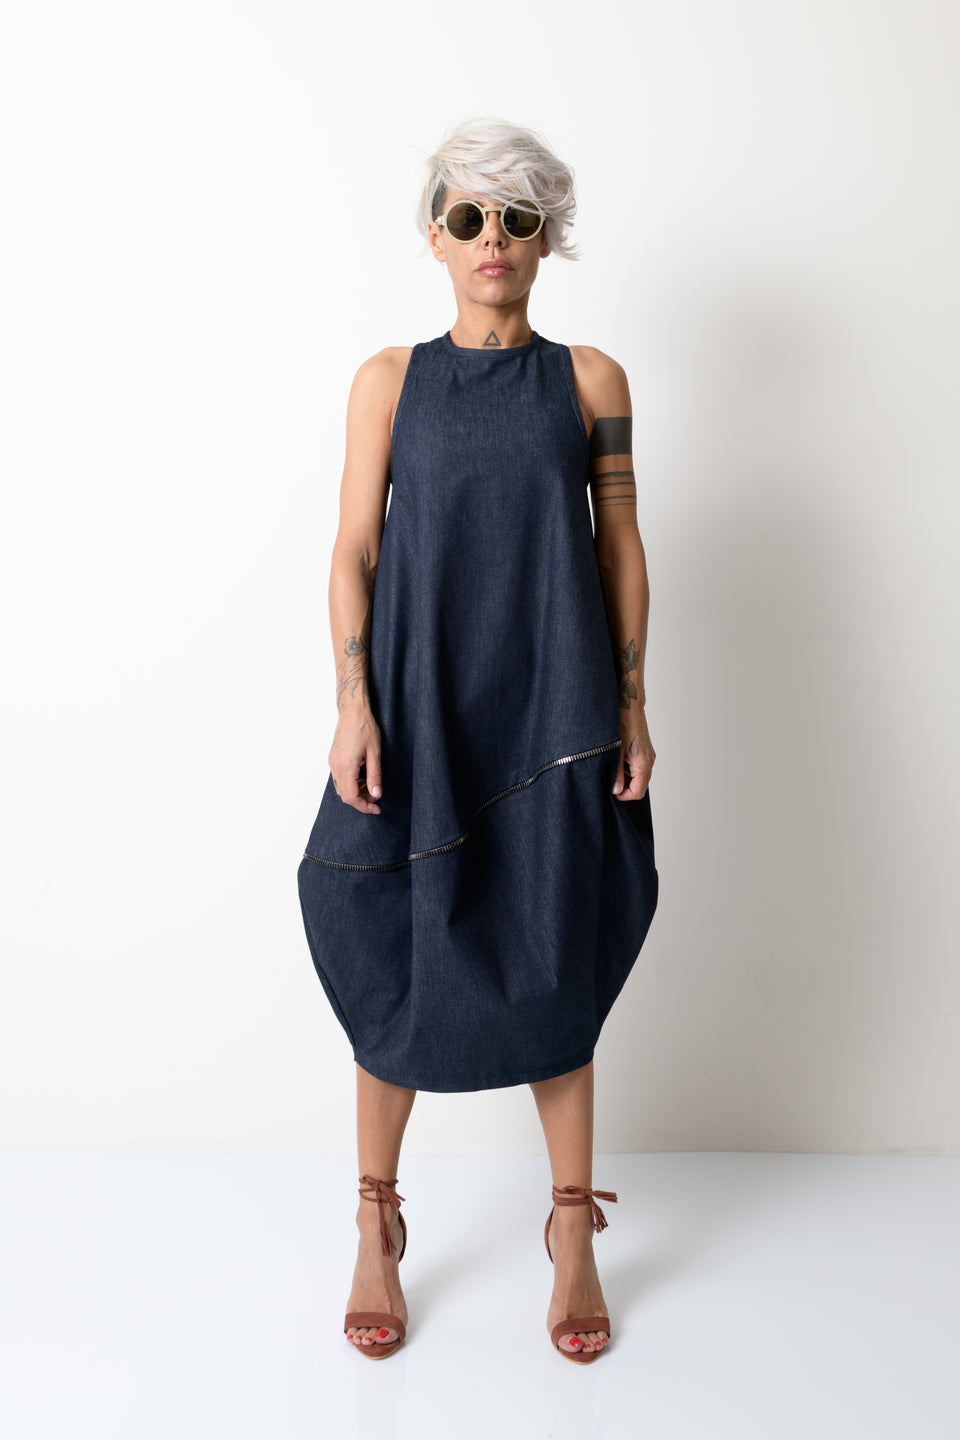 Denim Oversize Tunic Dress with a Zipper on the Back - Clothes By Locker Room